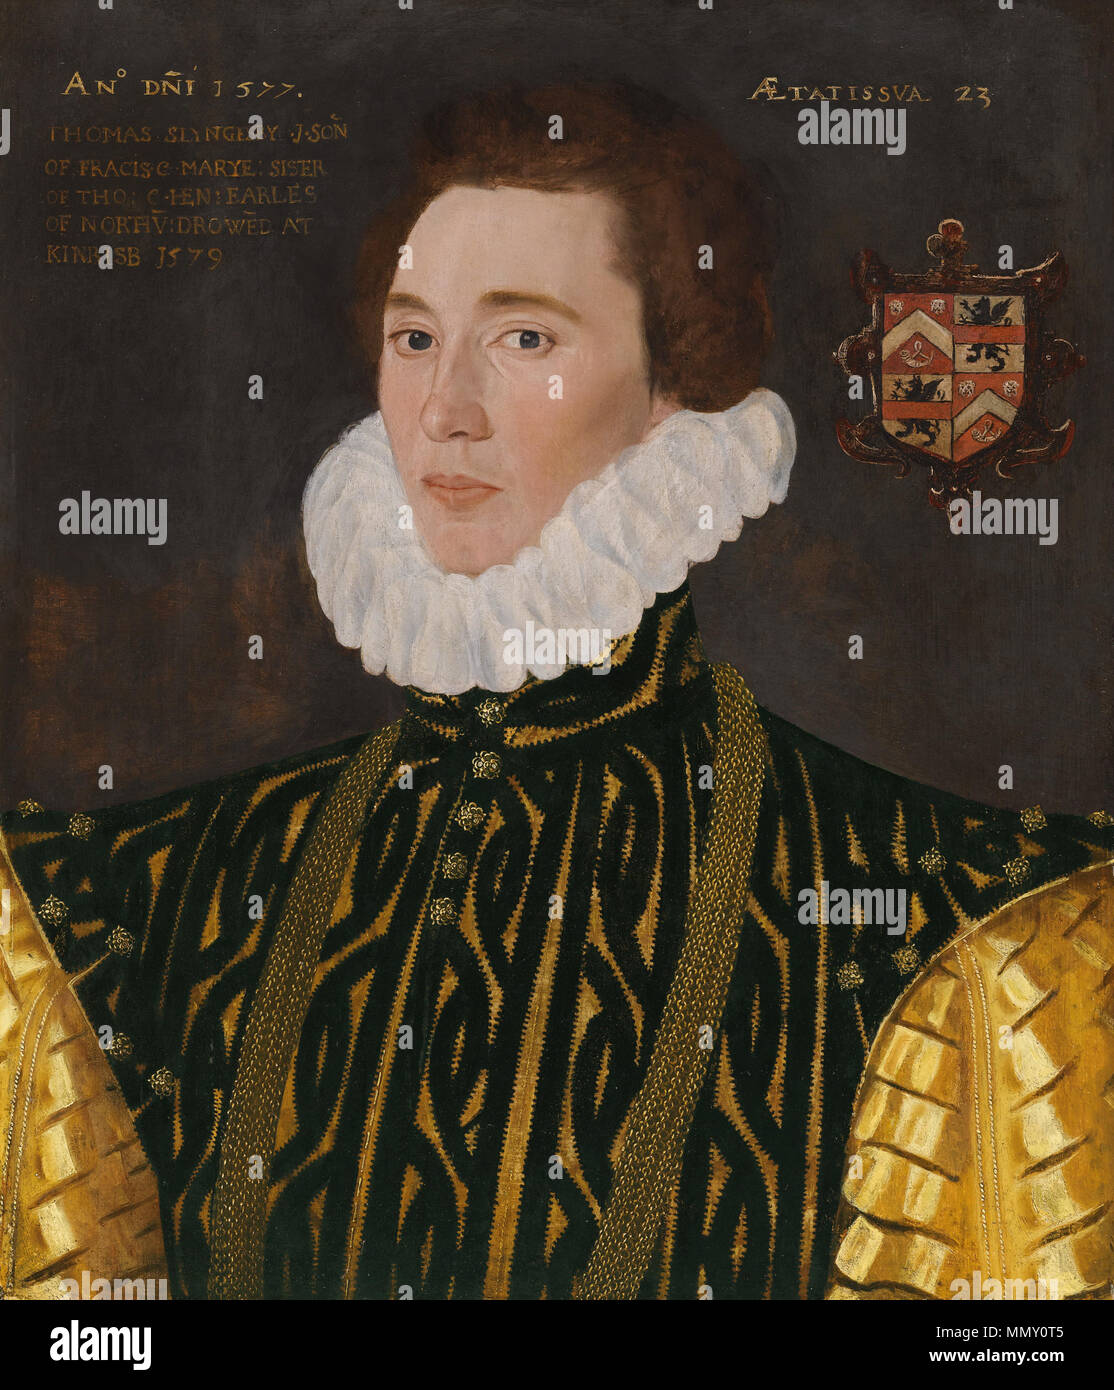 .  English: Portrait of Thomas Slingsby (1556-1579), eldest son of Francis Slingsby and his wife Mary Percy, sister of Thomas Percy, 7th Earl of Northumberland, Henry Percy, 8th Earl of Northumberland. The sitter was drowned aged 23.  . 1577. George Gower Portrait of Thomas Slingsby Stock Photo